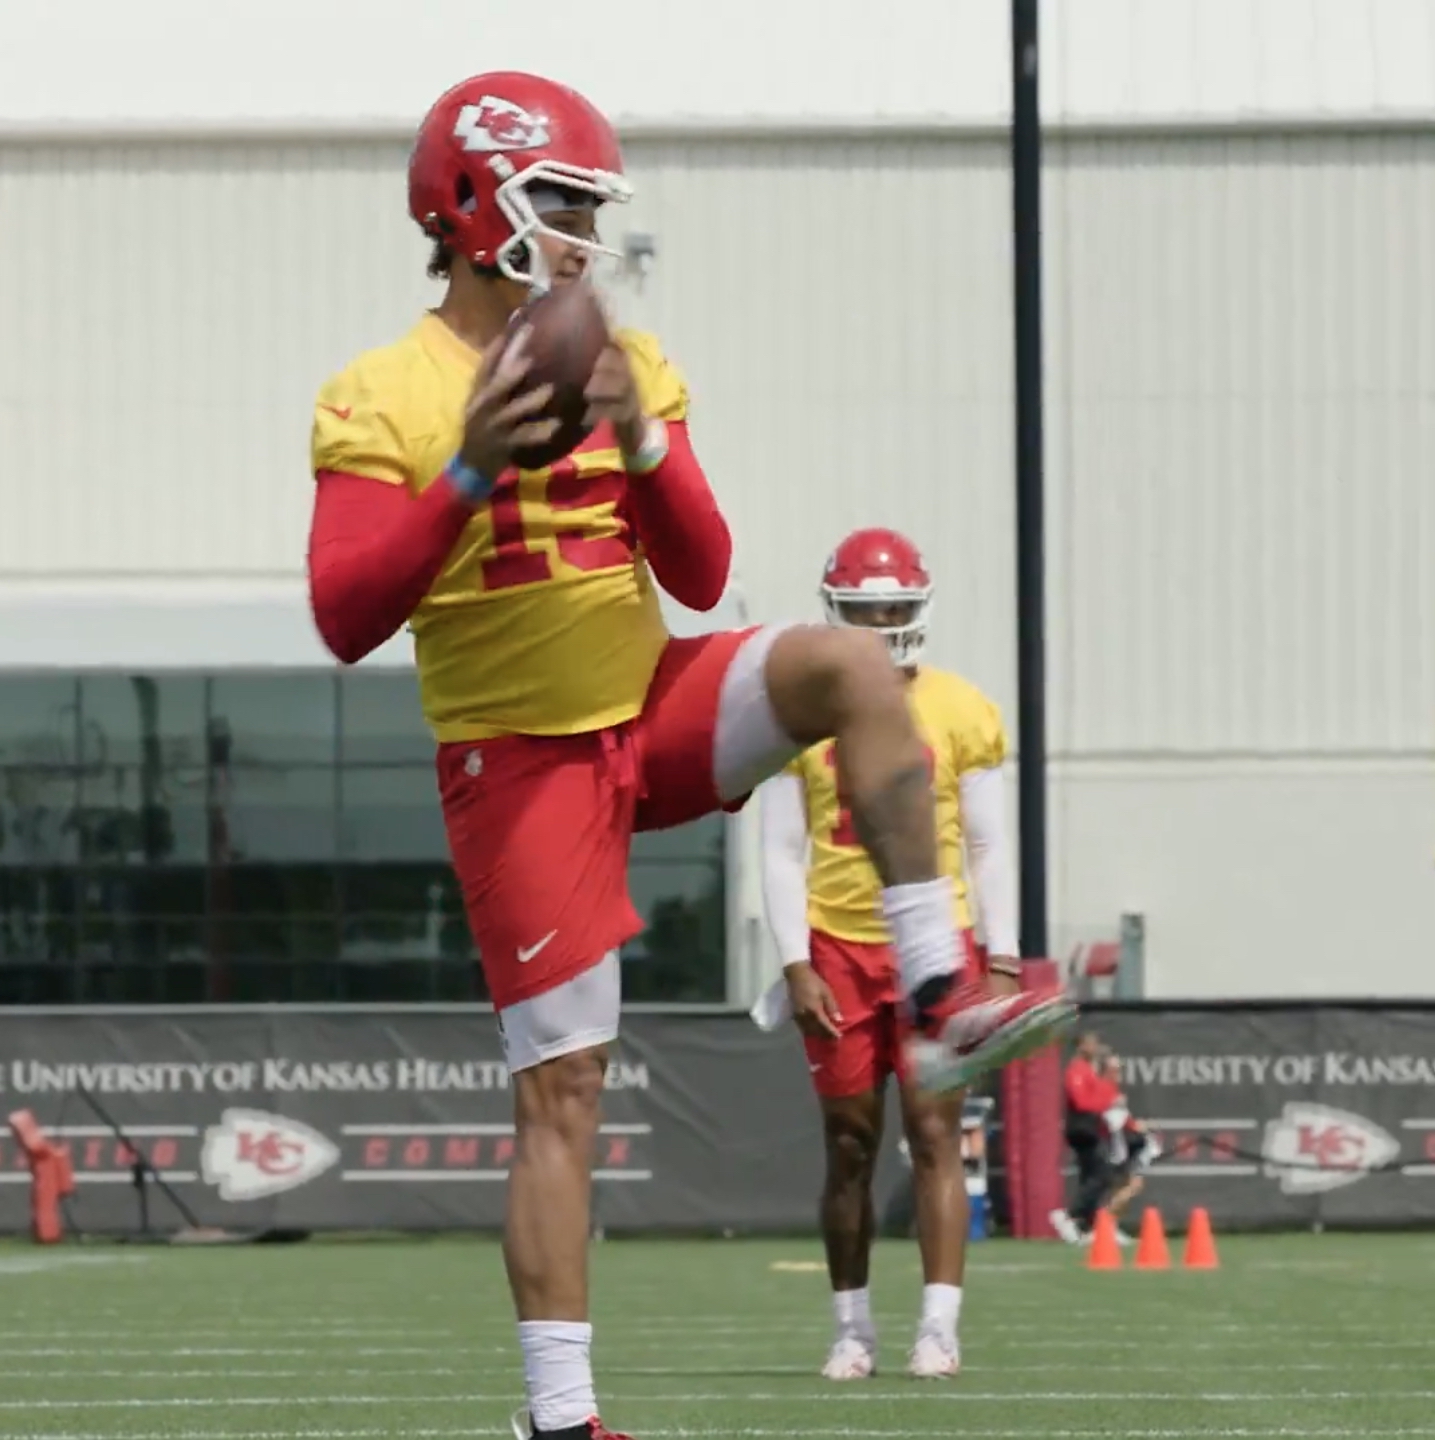 Patrick Mahomes showed off his pitching motion during the Kansas City Chiefs' mandatory minicamp on Tuesday